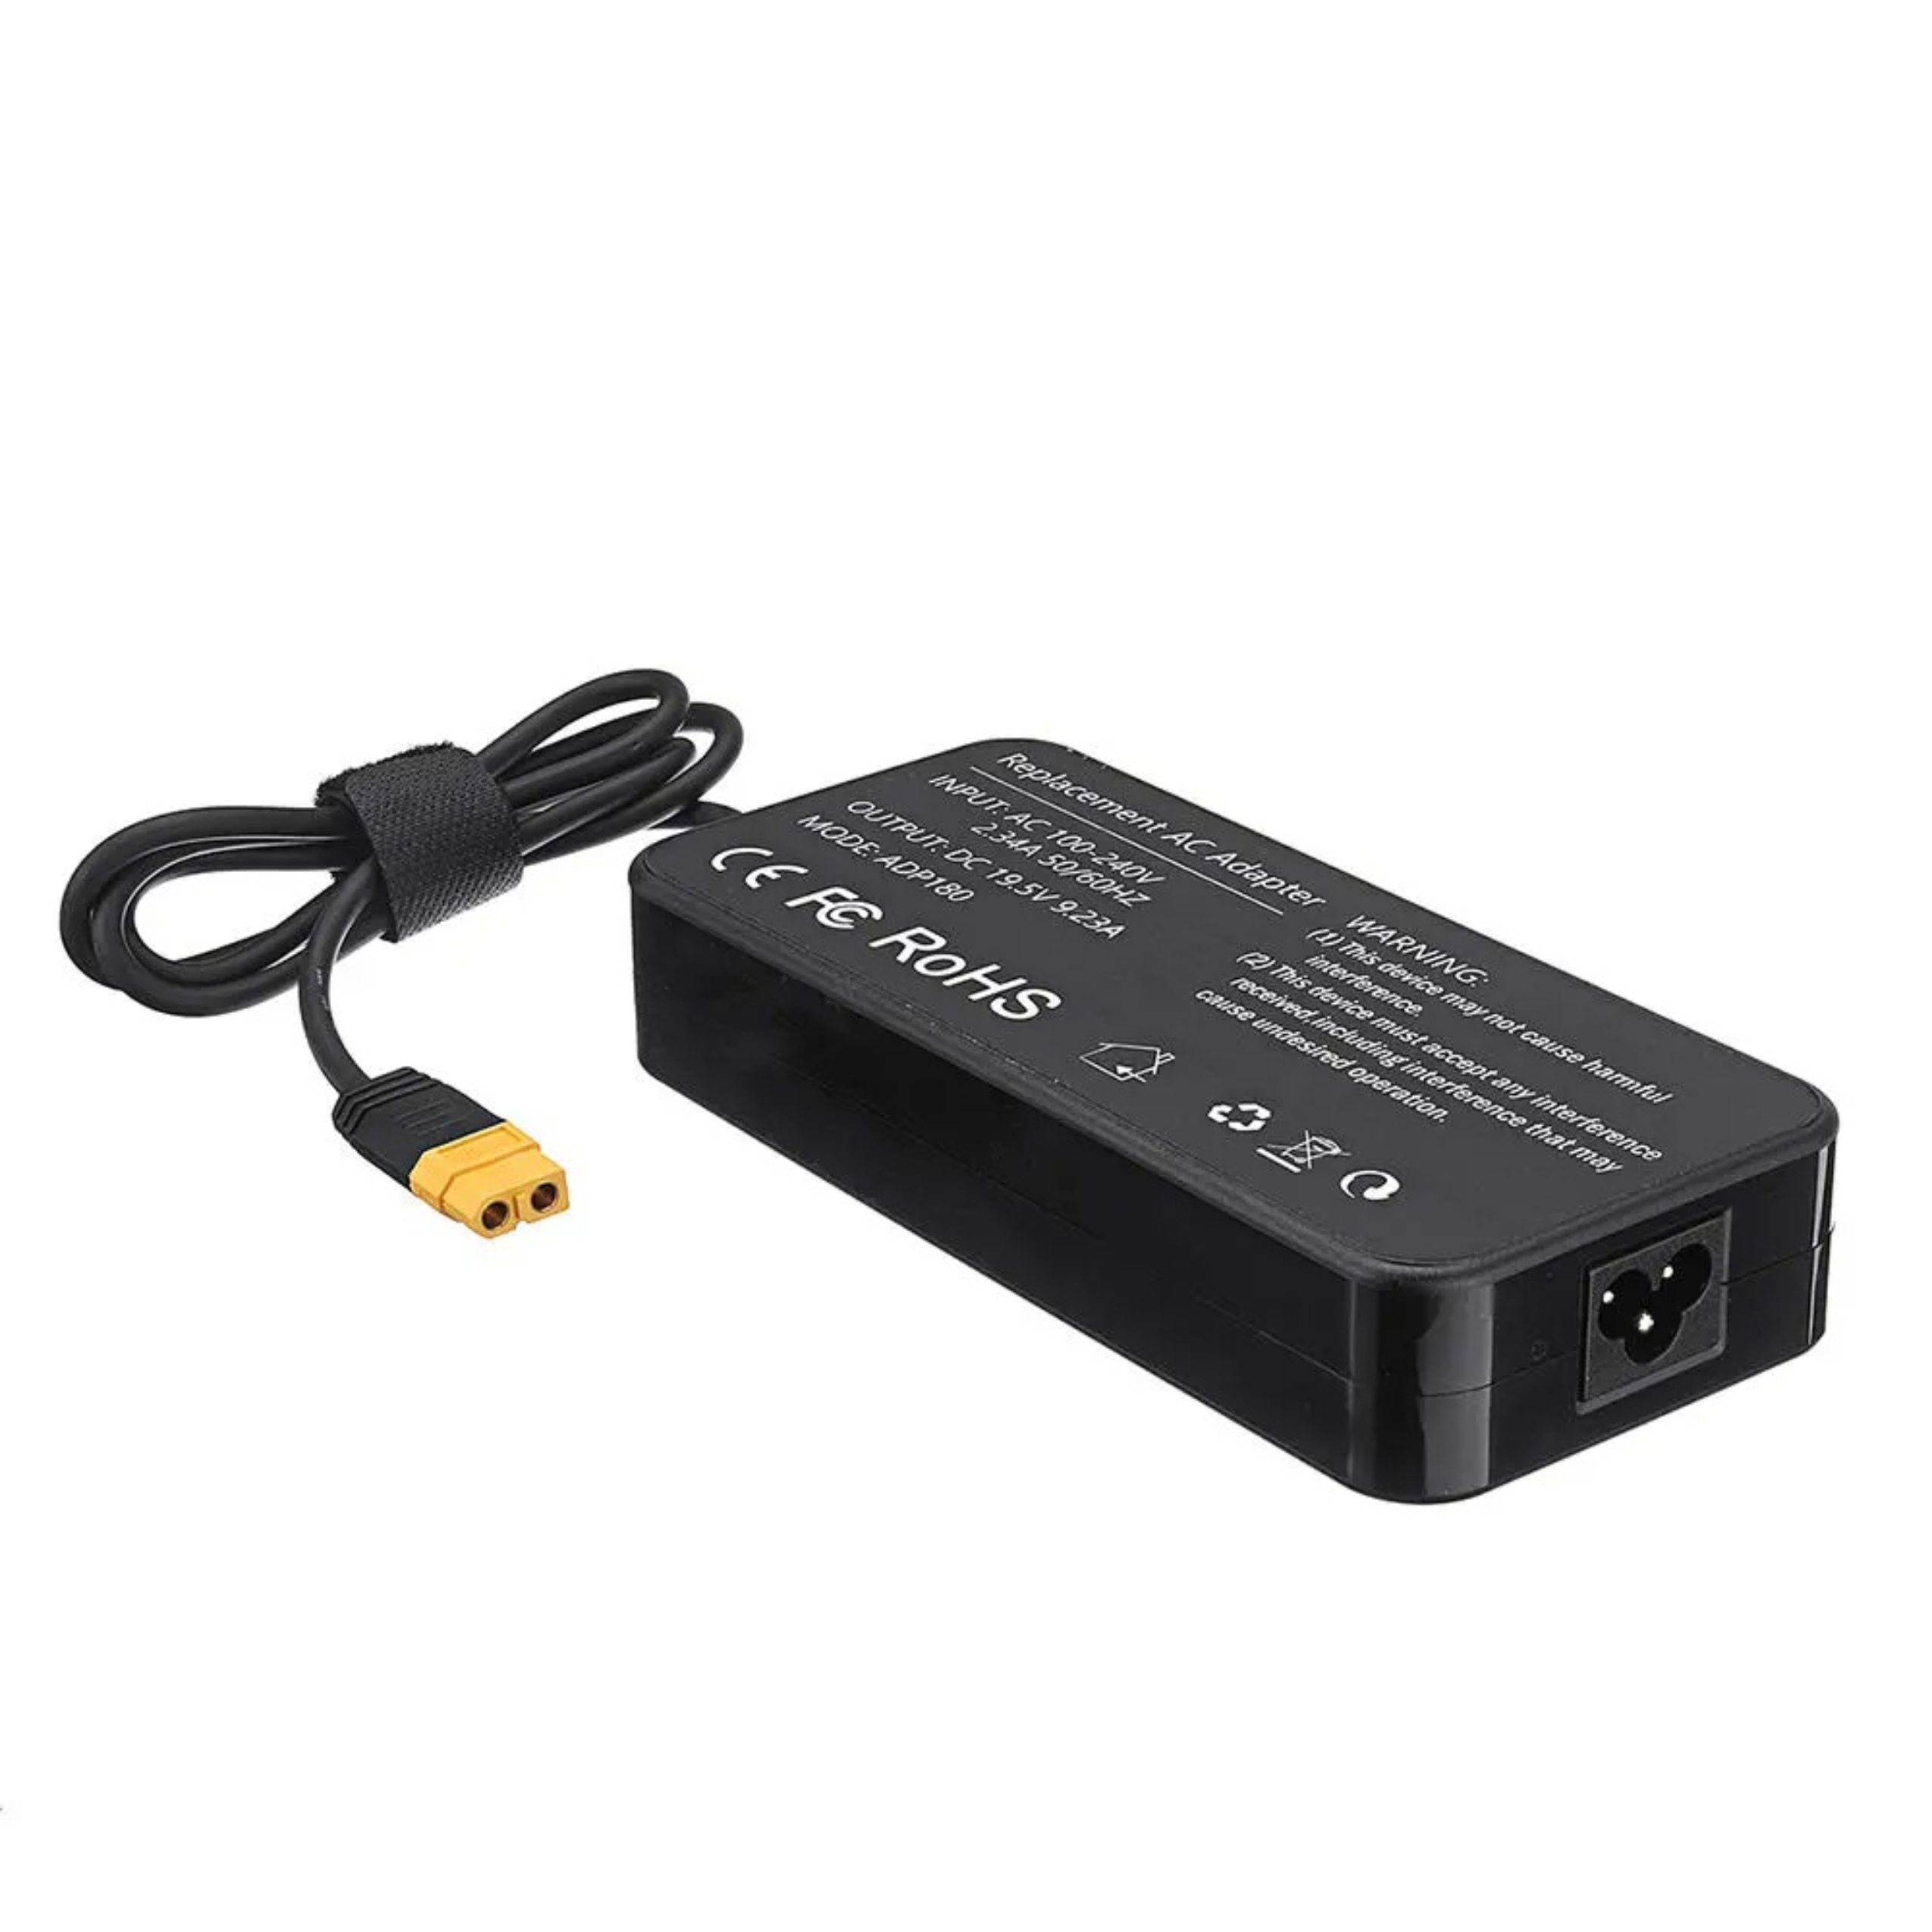 HP ToolKitRC ADP-180MB 180w Power Supply with XT60 Output - DroneDynamics.ca